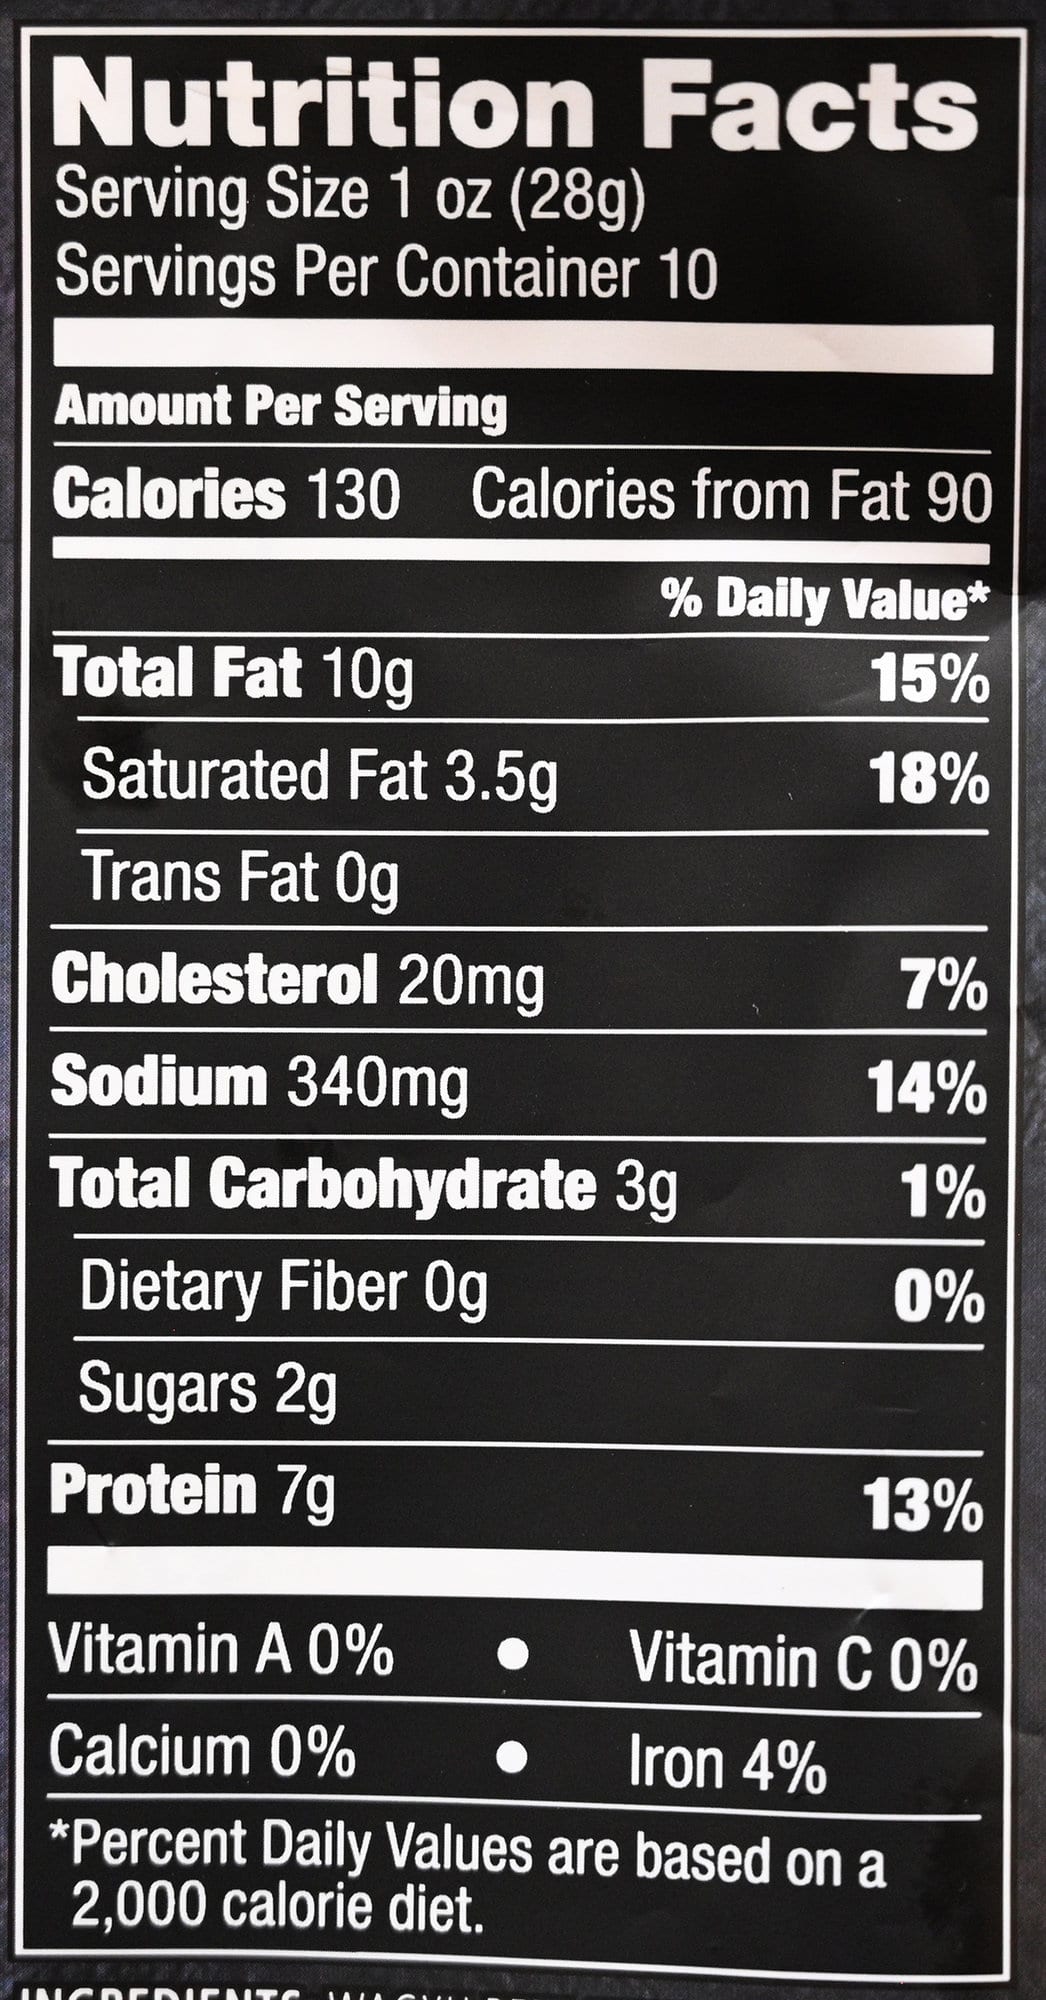 Image of the nutrition facts for the jerky from the back of the bag.